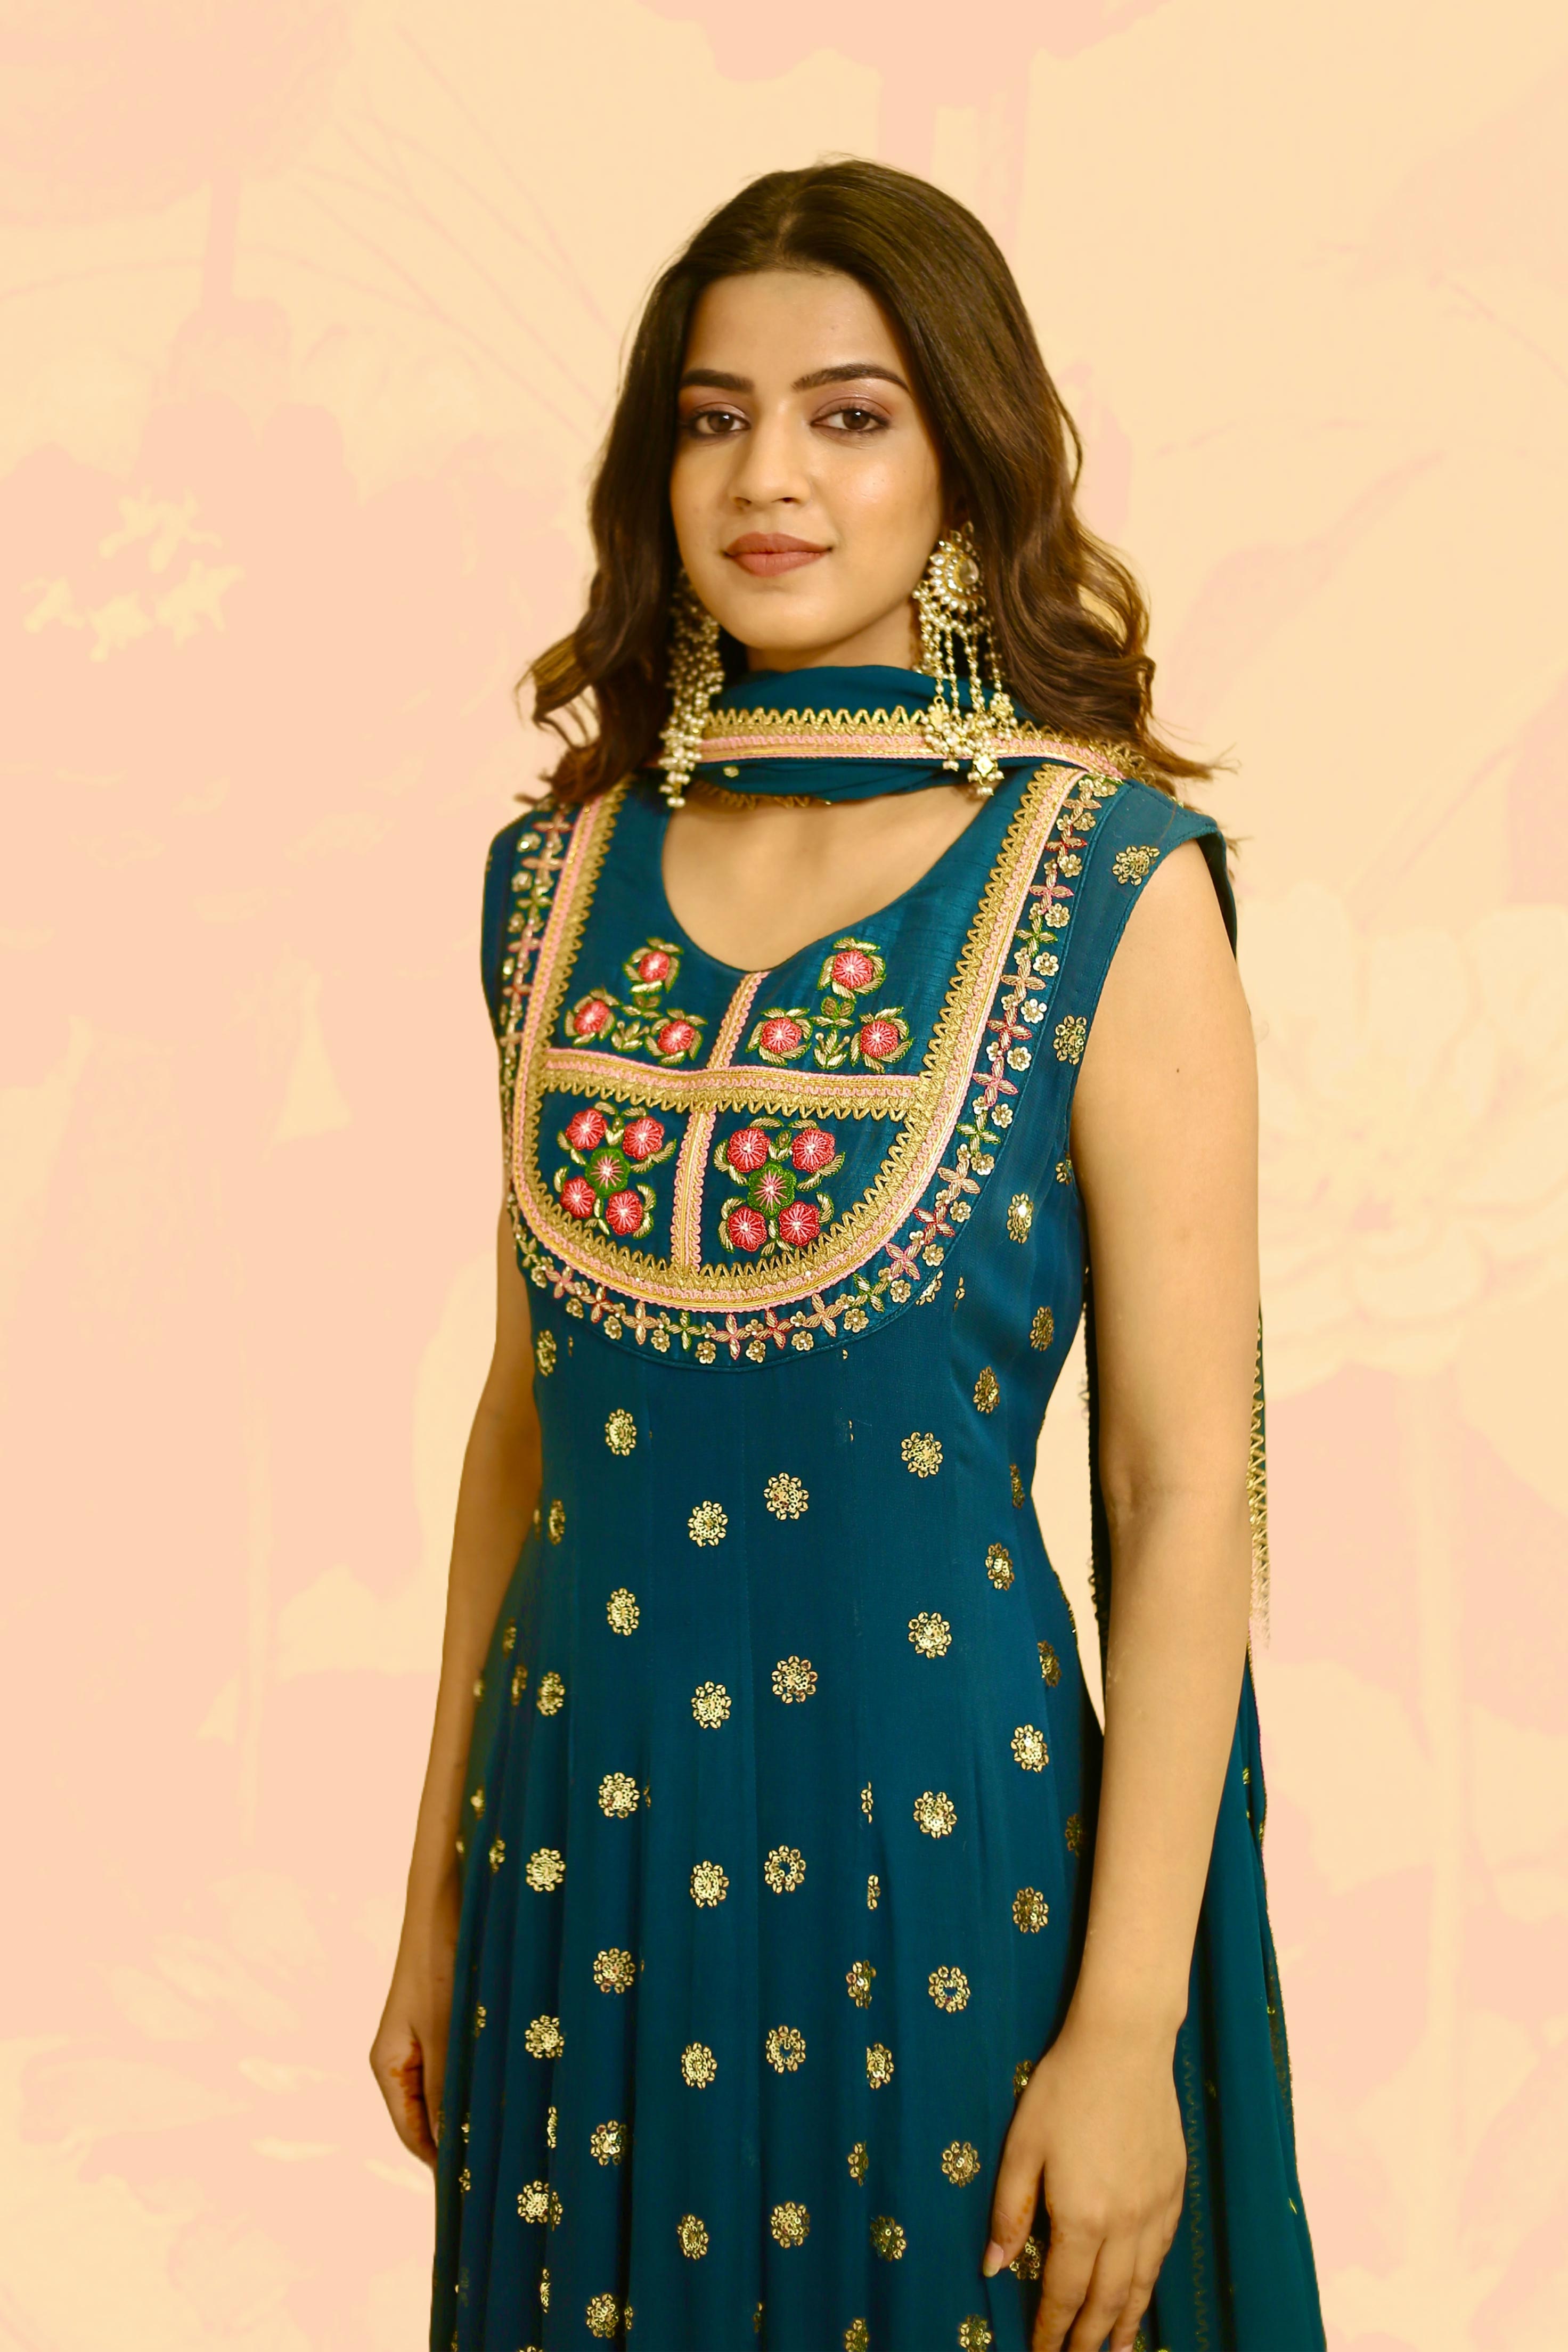 Shae by SASSAFRAS Pink & Green Patola Sleeveless Anarkali Dress Price in  India, Full Specifications & Offers | DTashion.com